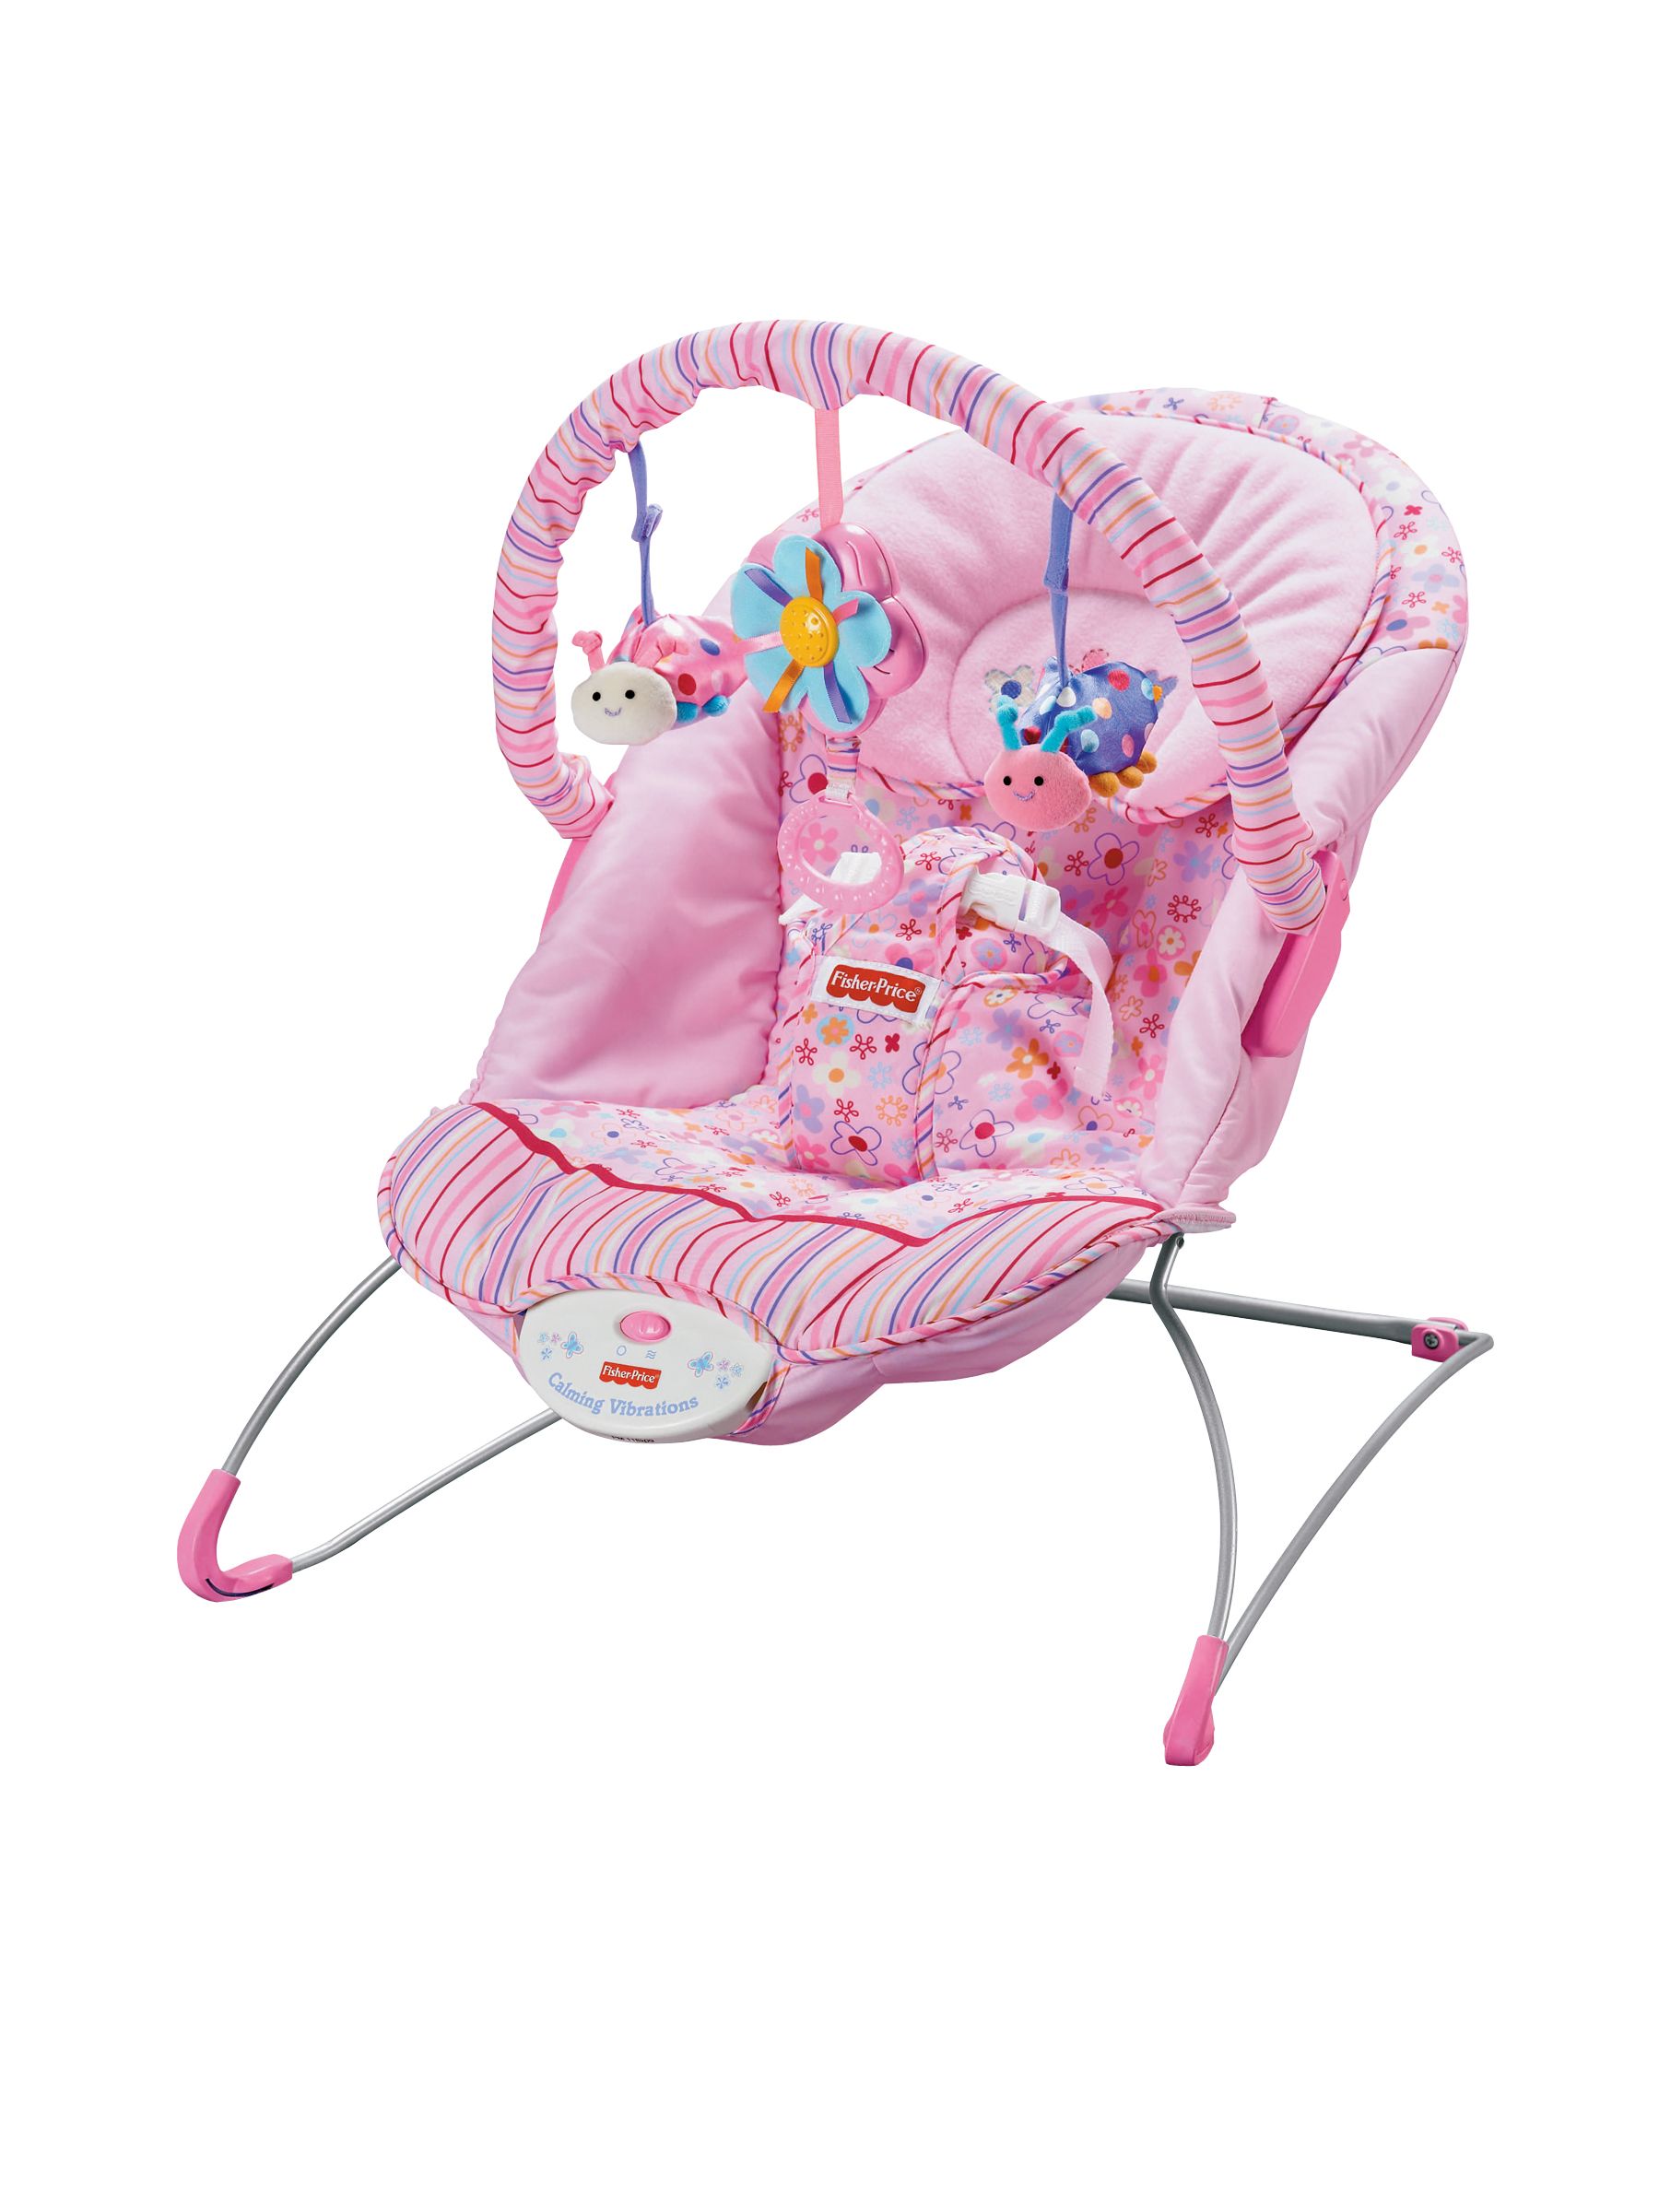 FisherPrice Think Pink Baby Bouncer Baby Baby Gear